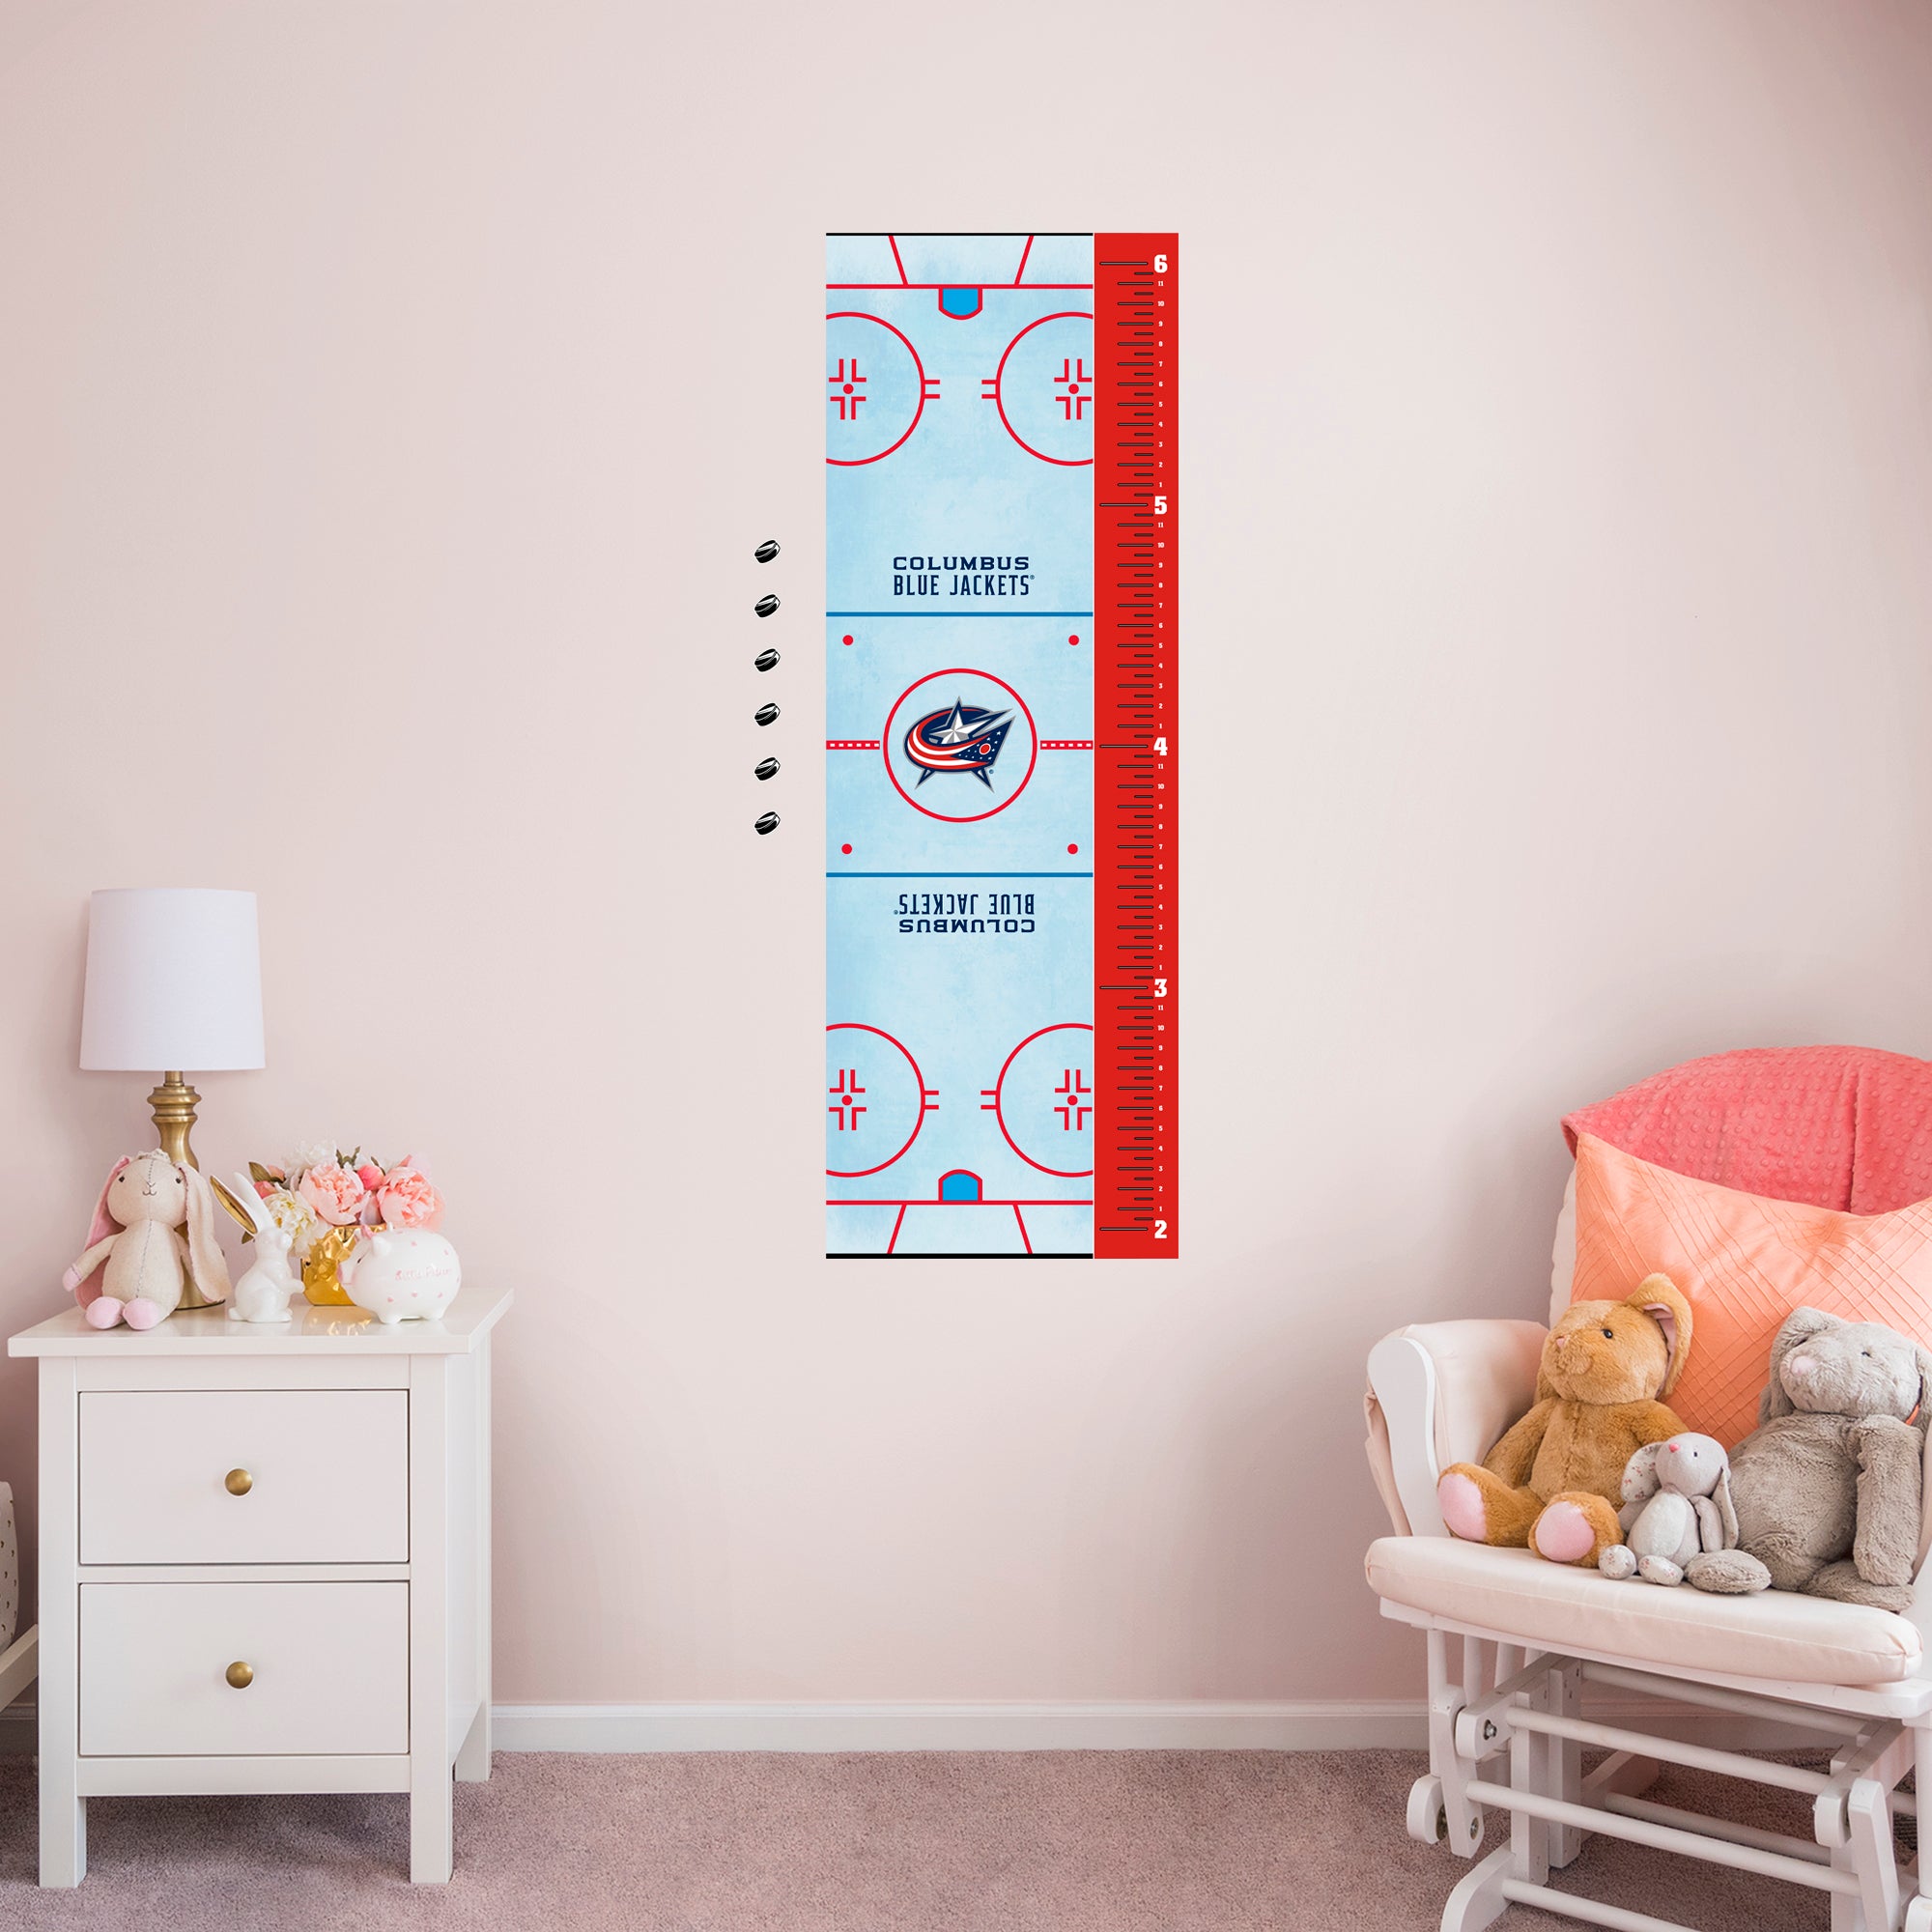 Columbus Blue Jackets: Rink Growth Chart - Officially Licensed NHL Removable Wall Graphic Large by Fathead | Vinyl